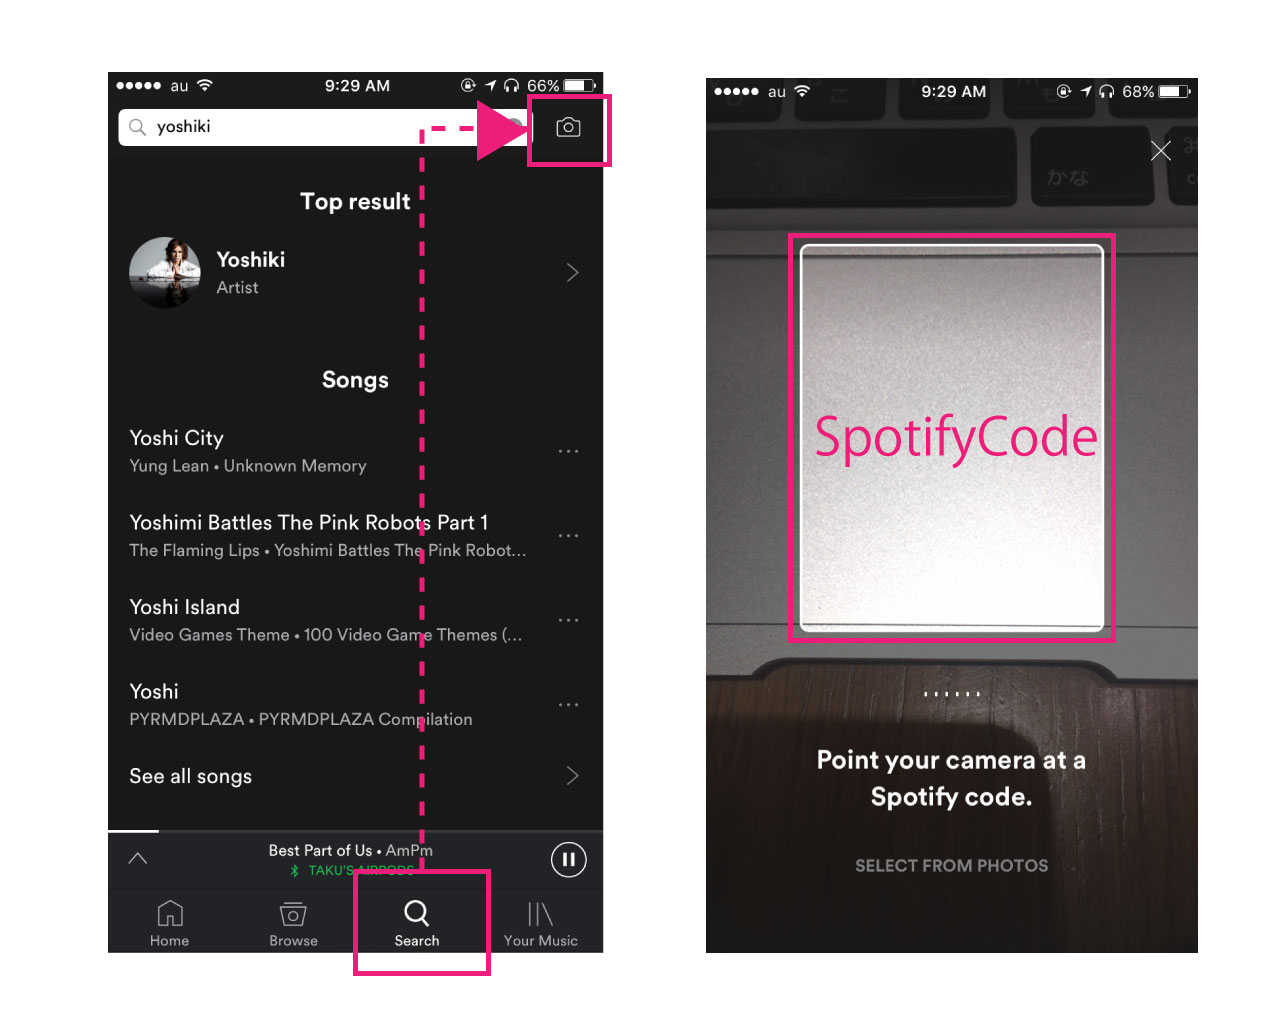 spotify-share-say-hello-to-spotify-codes-6